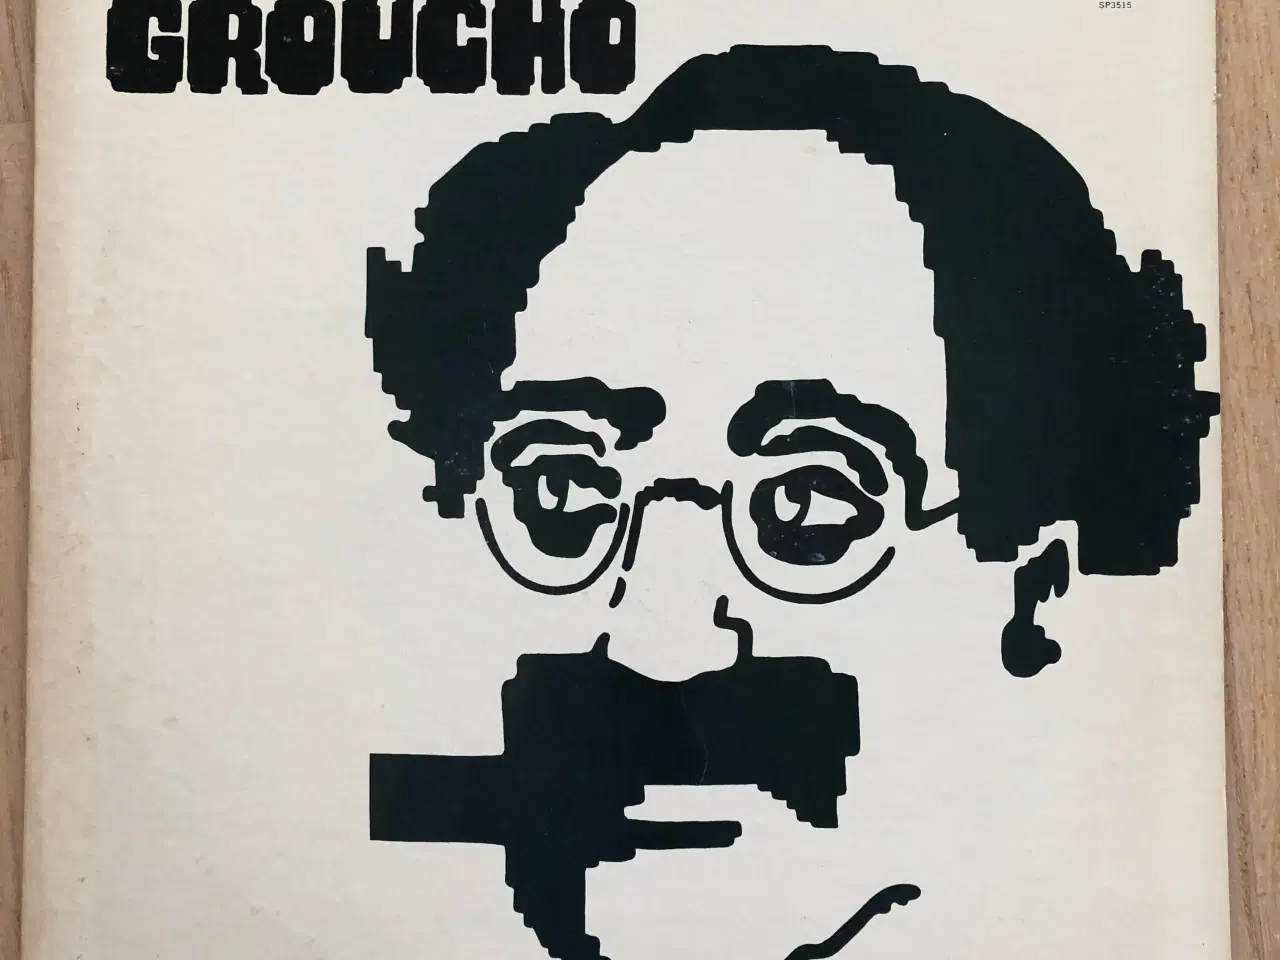 Billede 1 - Groucho Marx: An Evening with Groucho